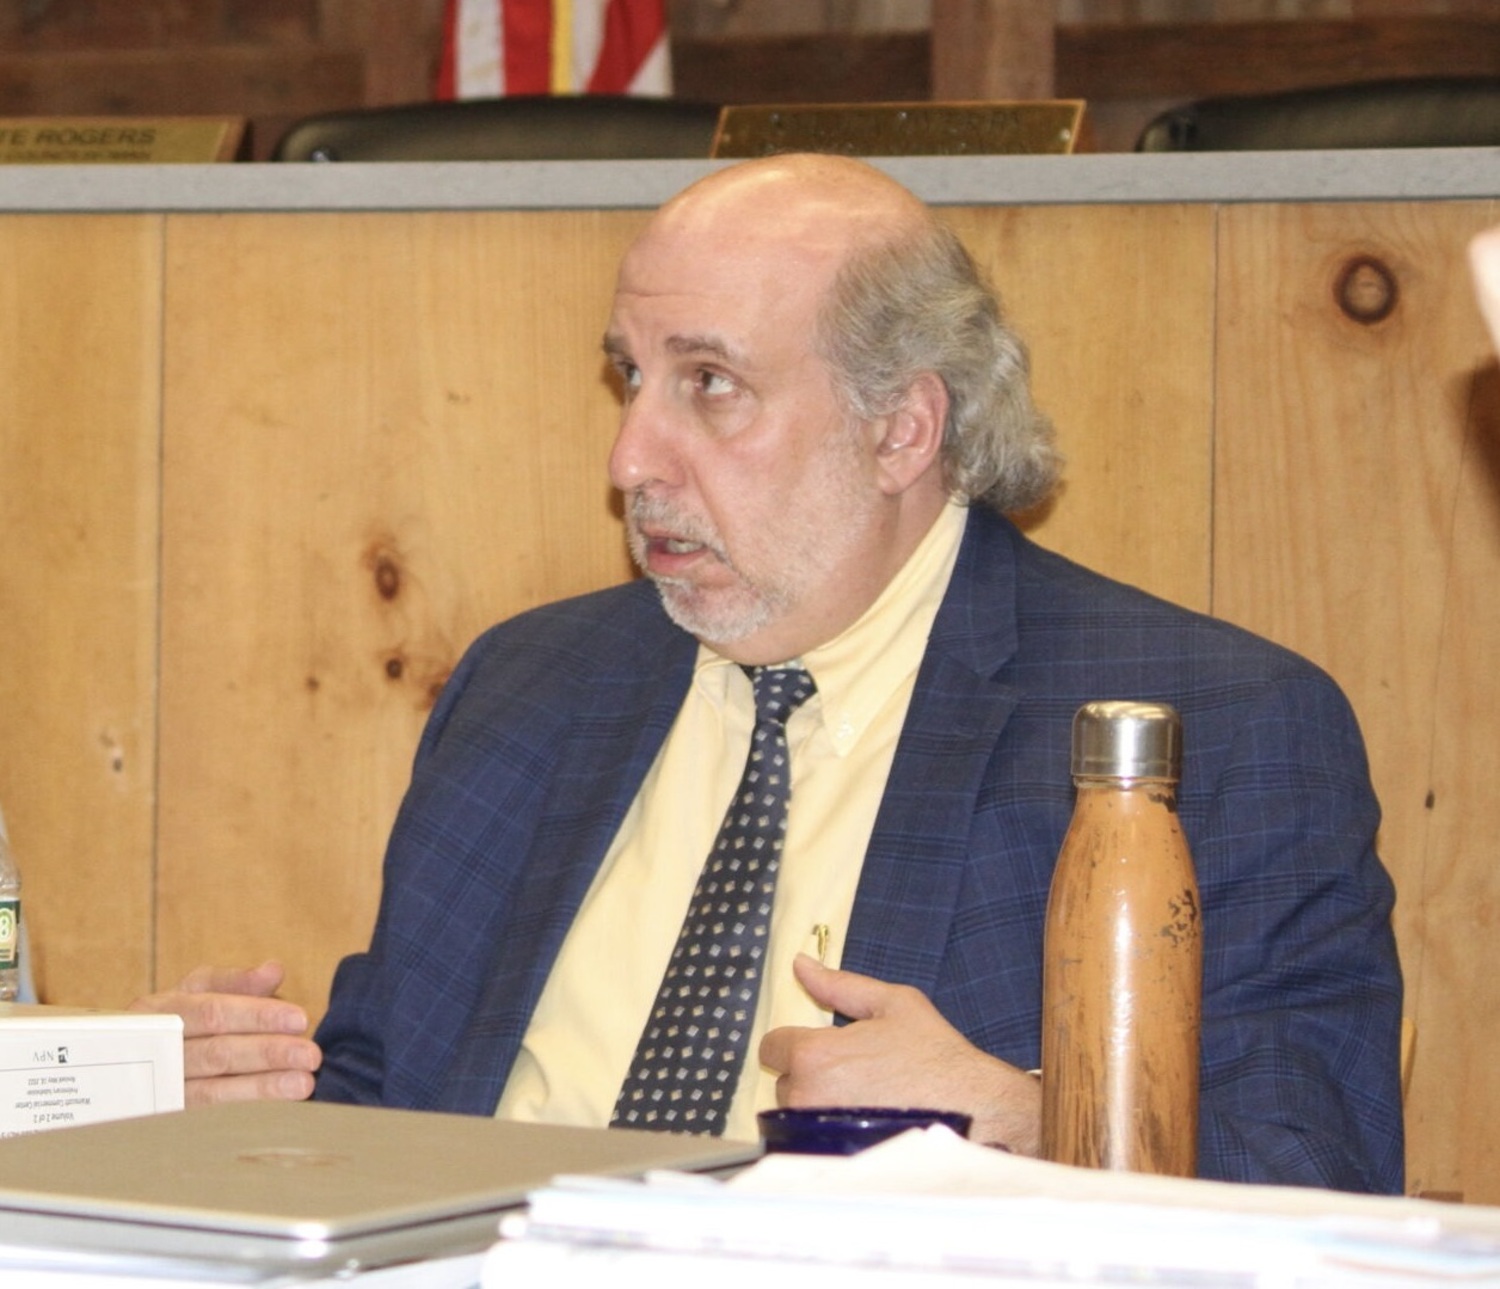 The East Hampton Town Planning Board has objected to the Town Board leading the review of the new Senior Center project. Chairman Sam Kramer, pictured, and five of the other six board members voted in favor of the Planning Board seeking lead agency status for the project review. MICHAEL WRIGHT